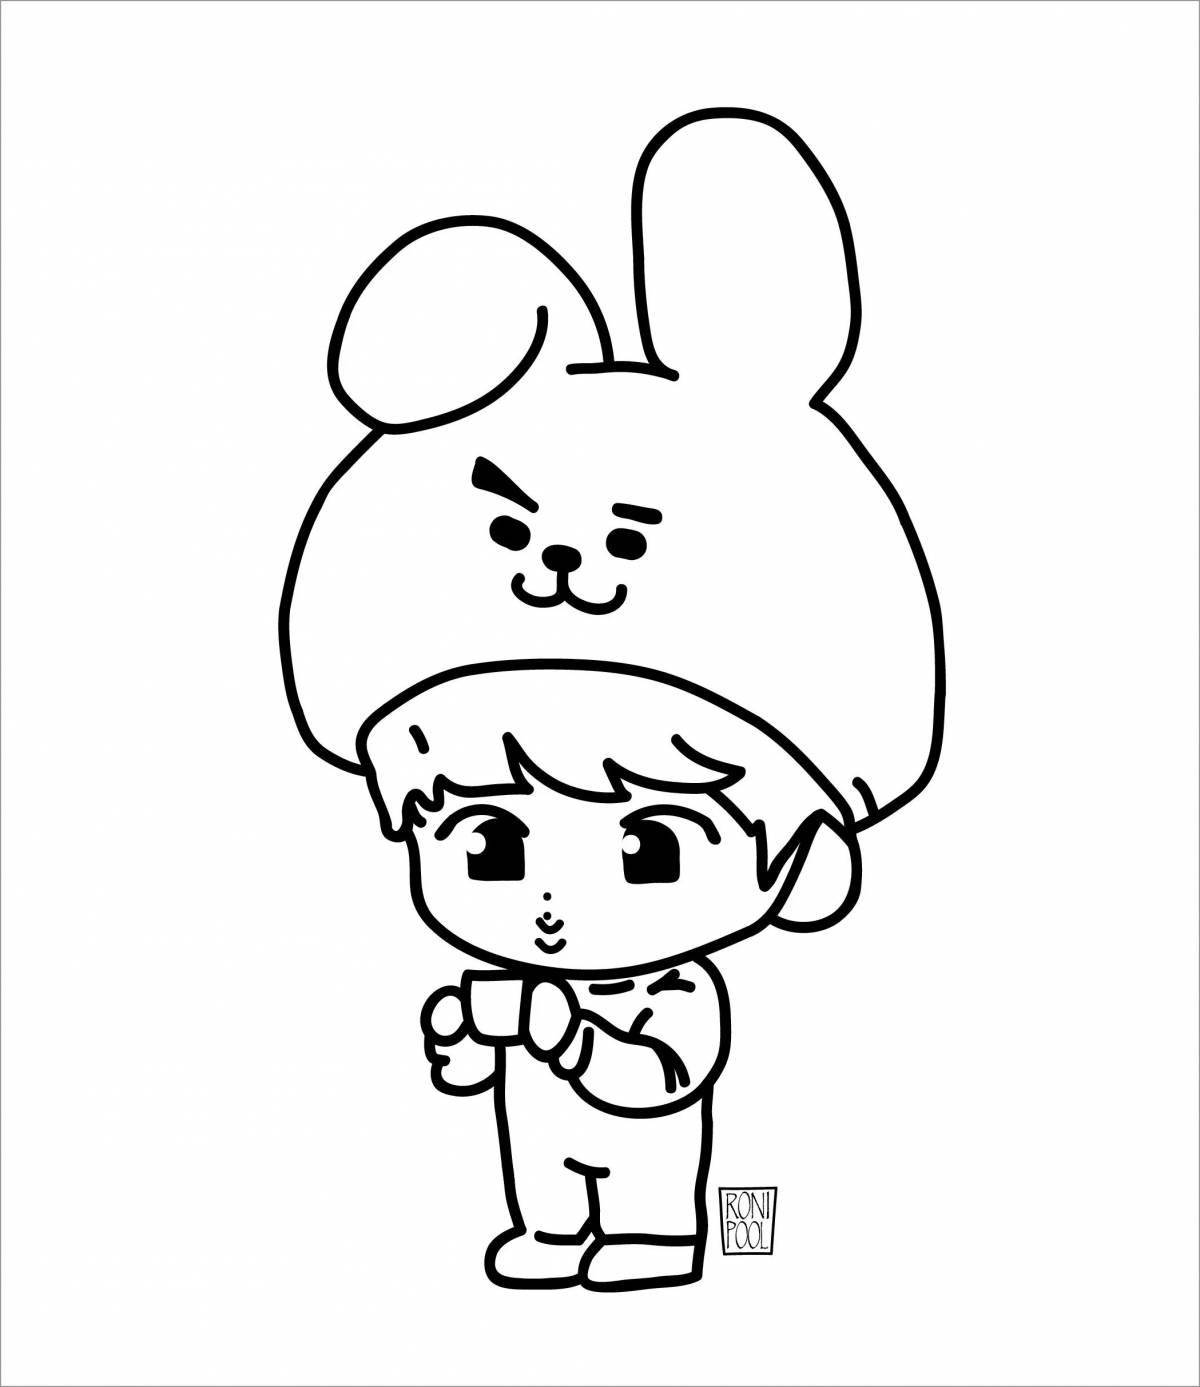 Radiant coloring page bts jungkook